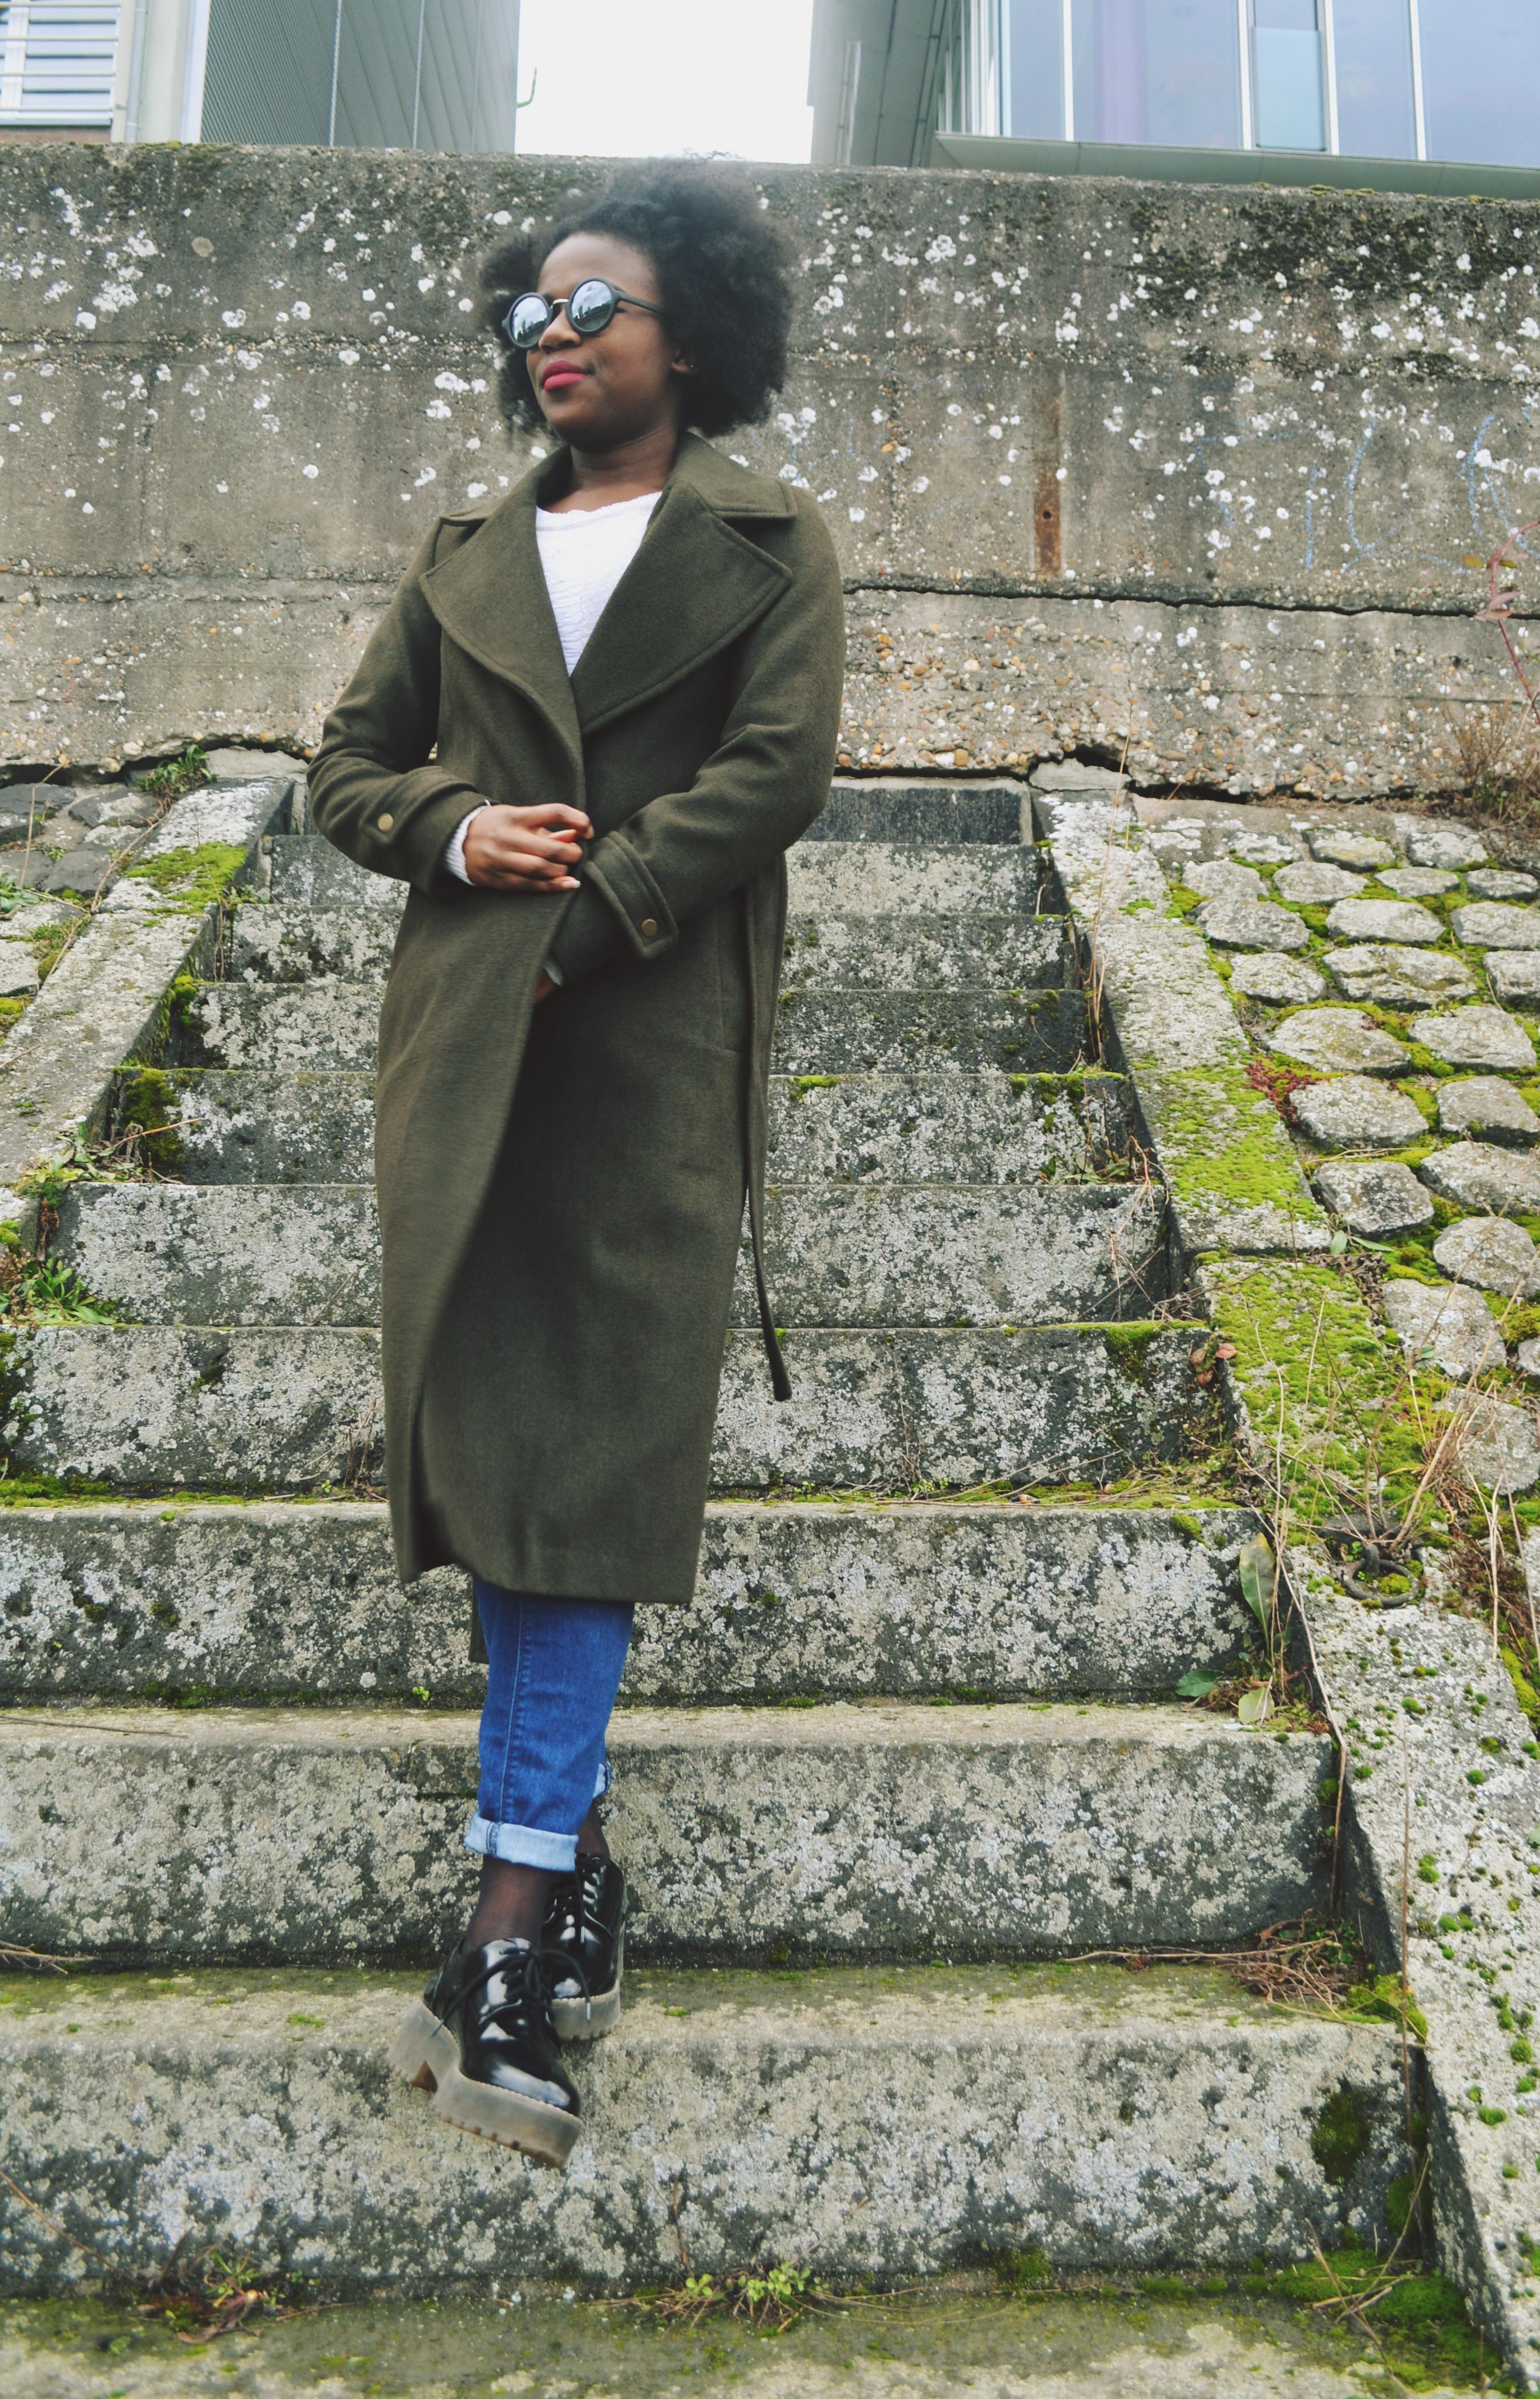 A woman walks down outdoor steps. She is wearing a longline khaki coat and holding it closed.